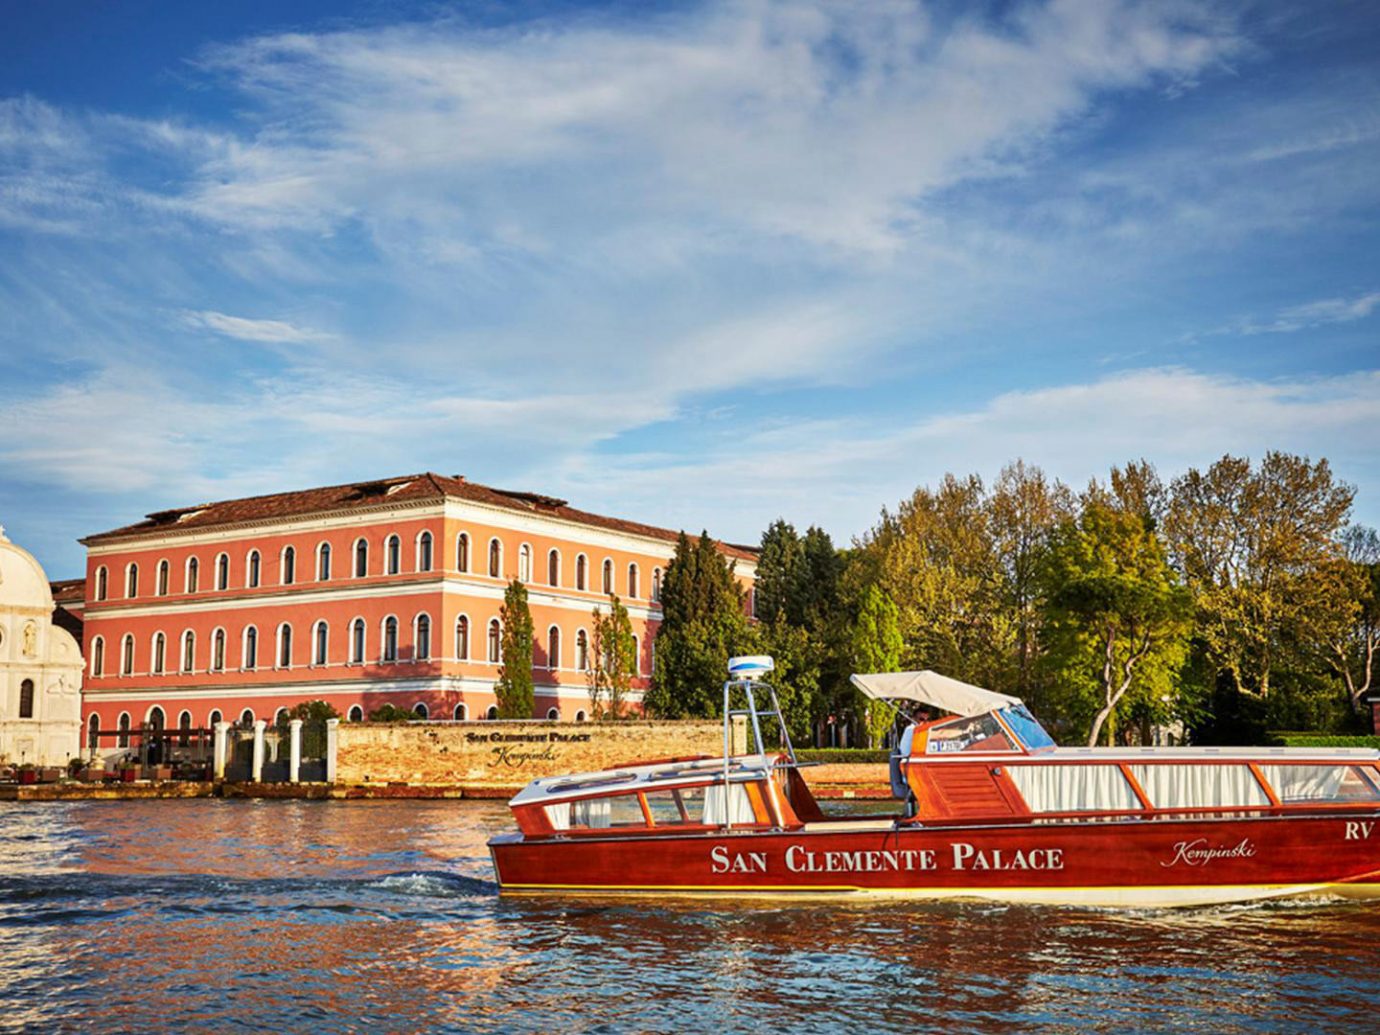 Hotels Italy Luxury Travel Venice sky water Boat vehicle River waterway Canal Sea evening boating traveling